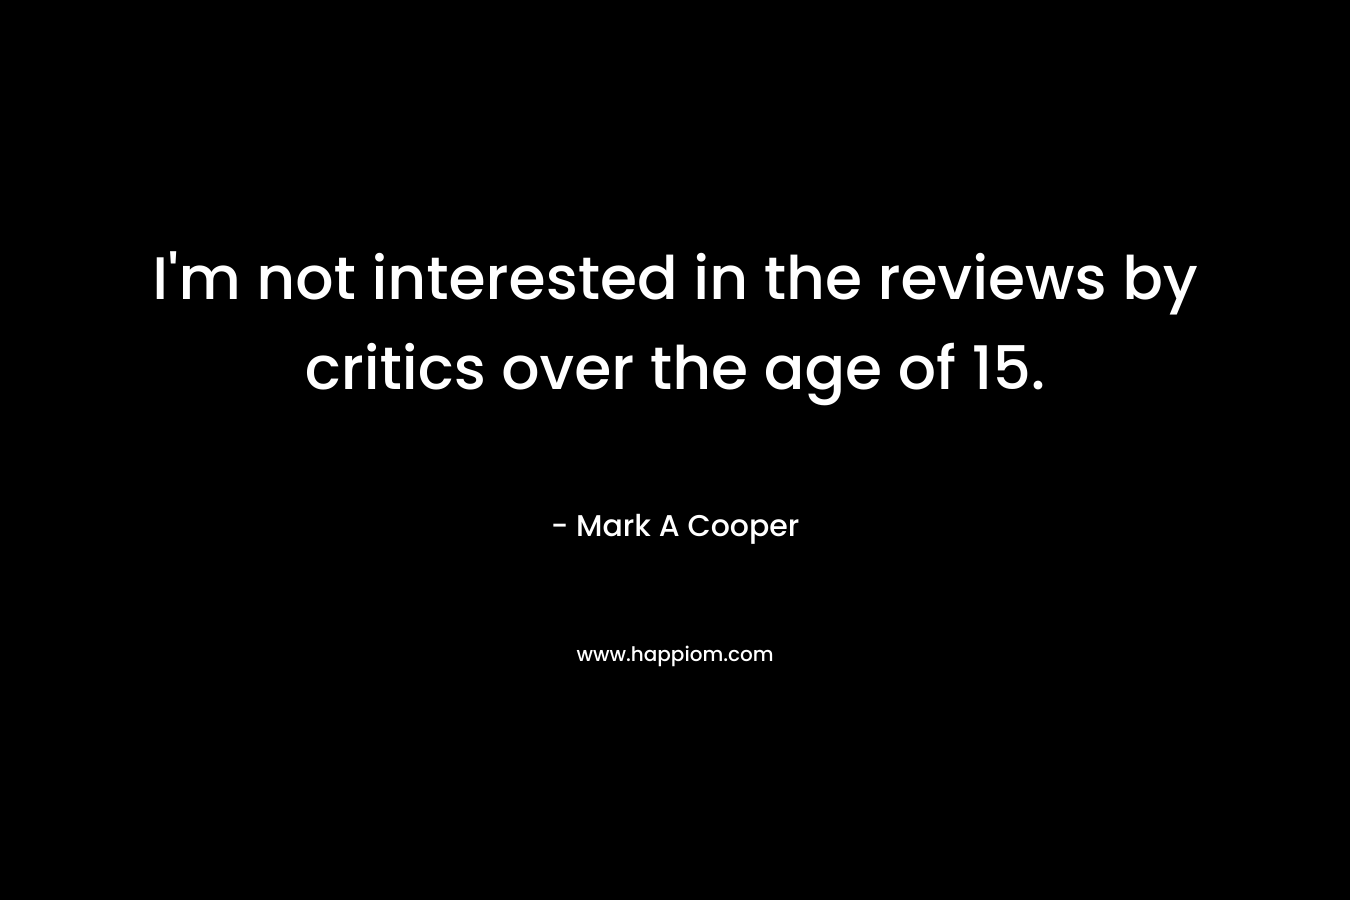 I’m not interested in the reviews by critics over the age of 15. – Mark A Cooper